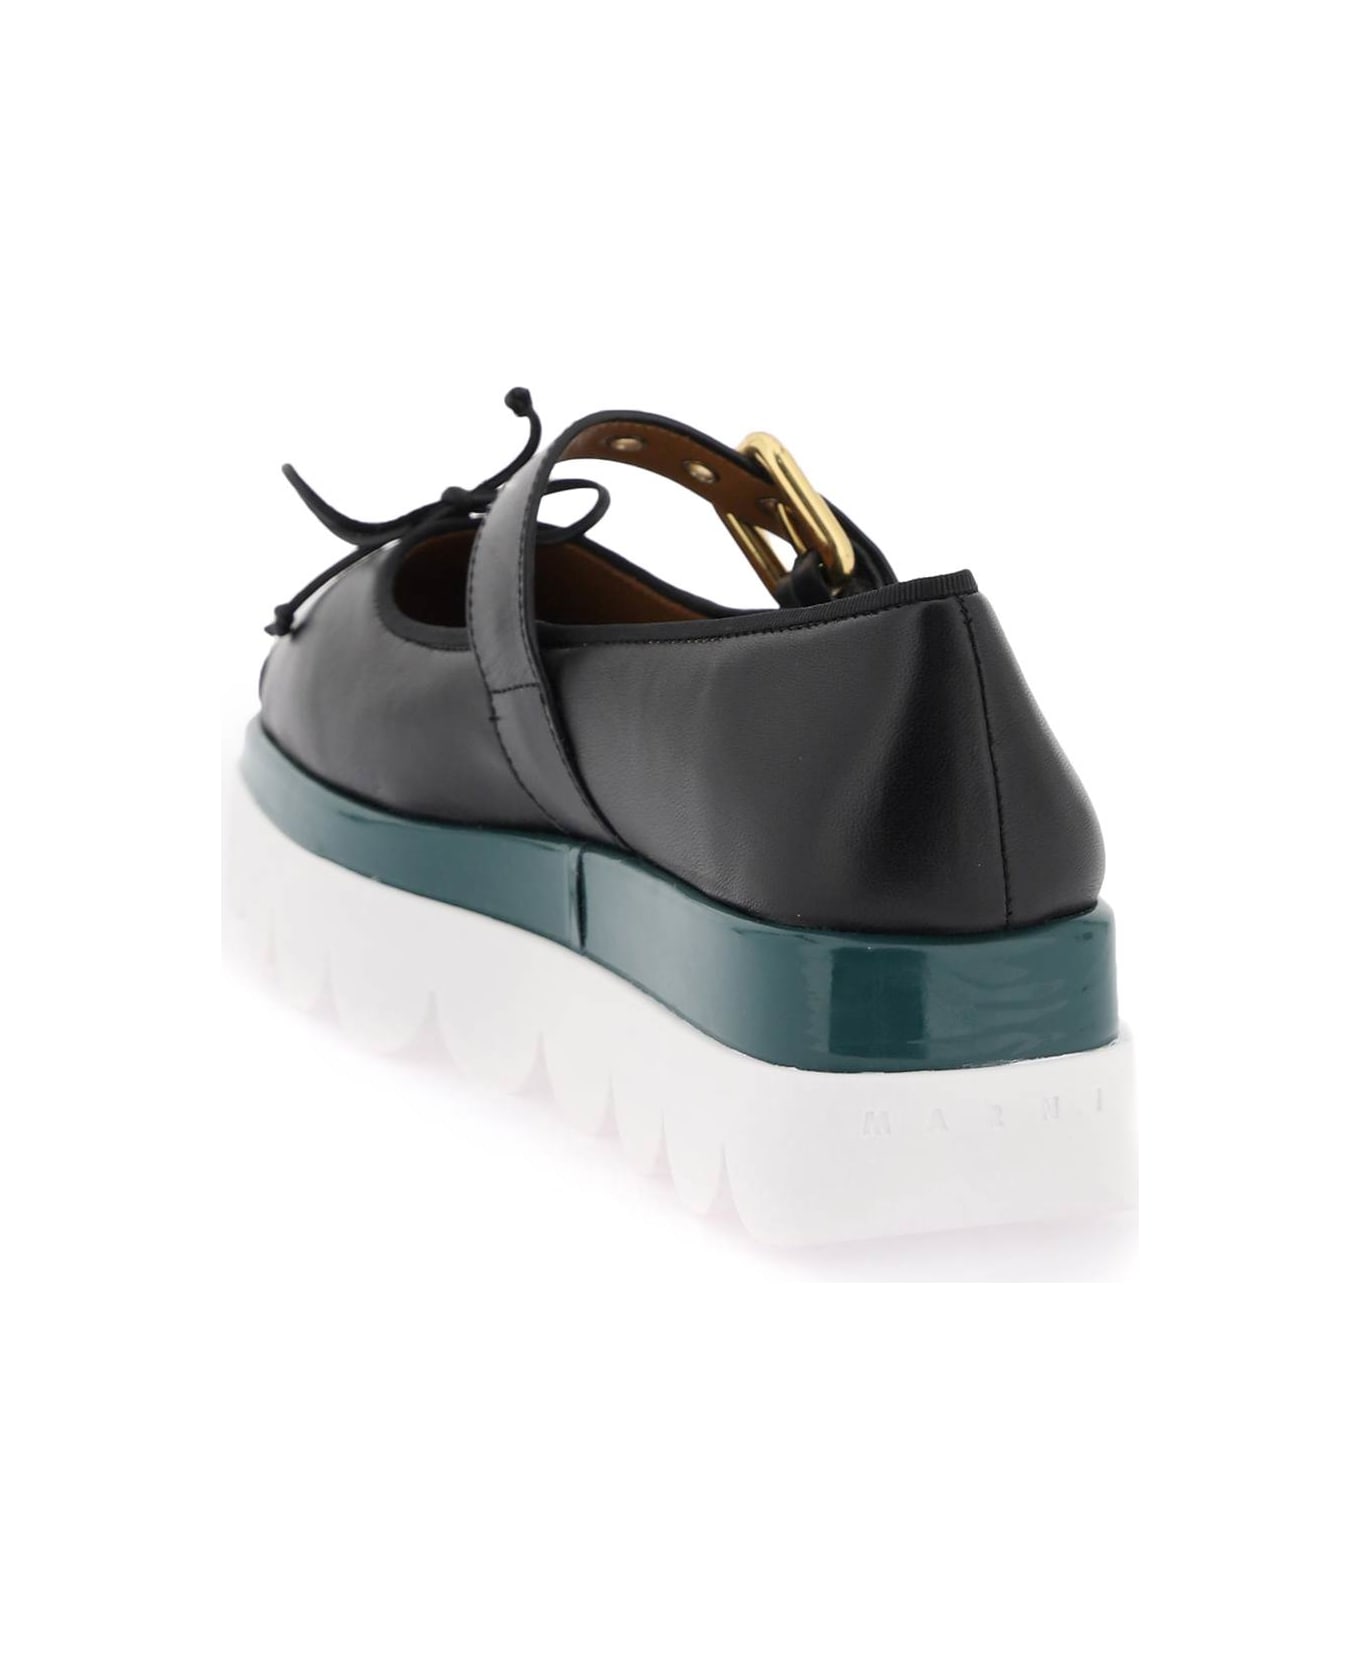 Marni Nappa Leather Mary Jane With Notched Sole - Black レースアップシューズ